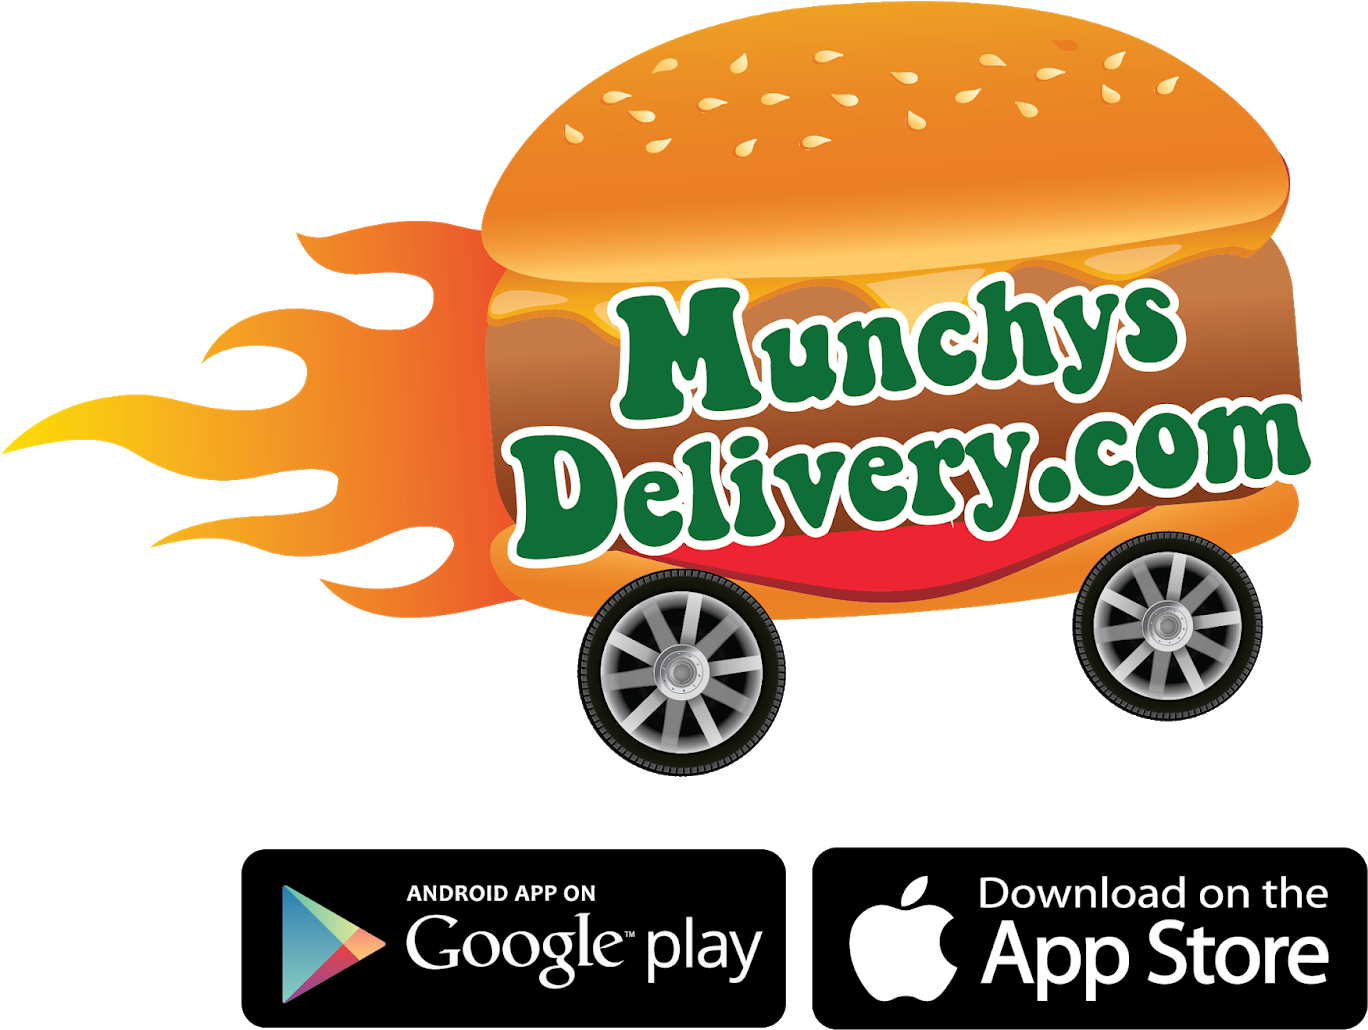 Munchys Delivery, Munchys Delivery Coupon, Munchys - Available On The App Store (1600x1600)